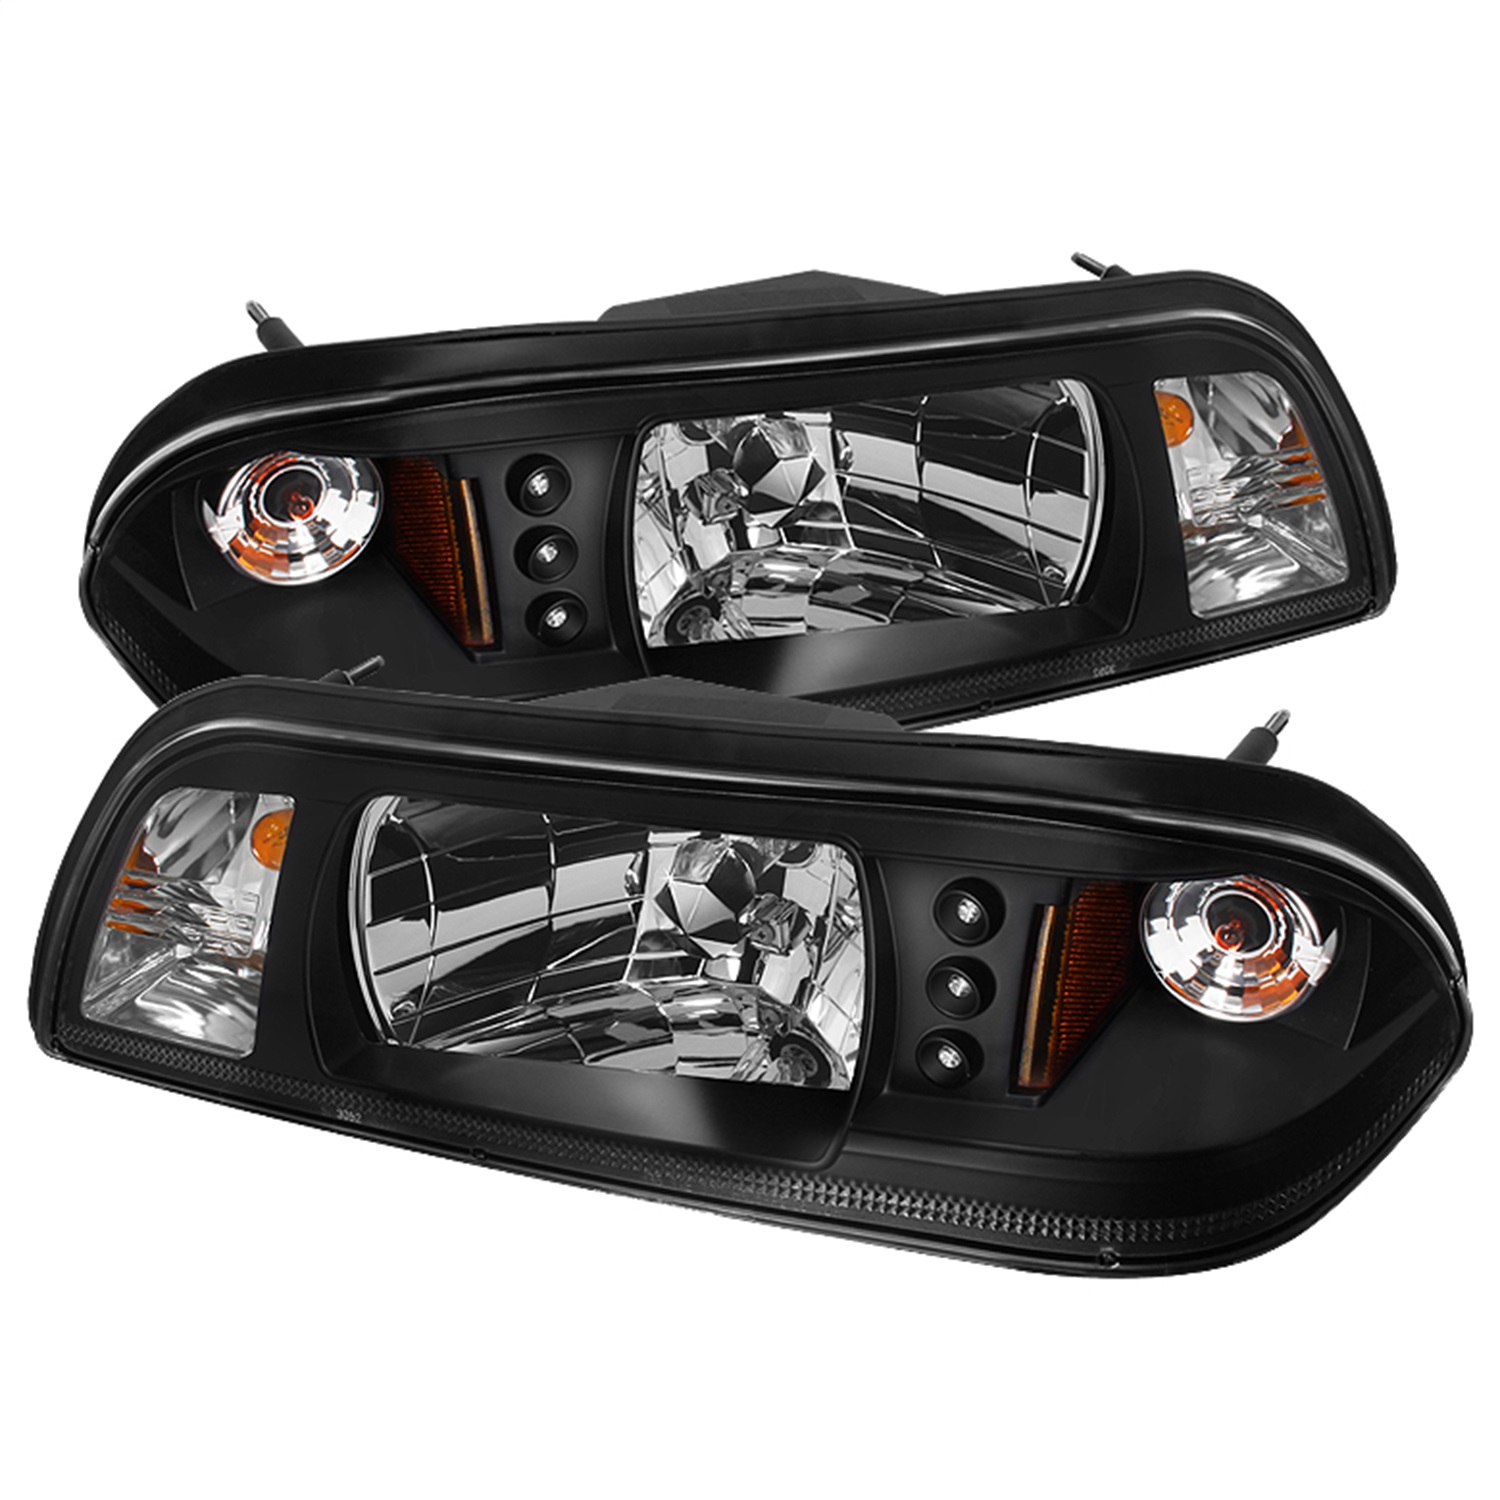 Spyder Auto 5012531 LED Crystal Headlights Fits 87-93 Mustang